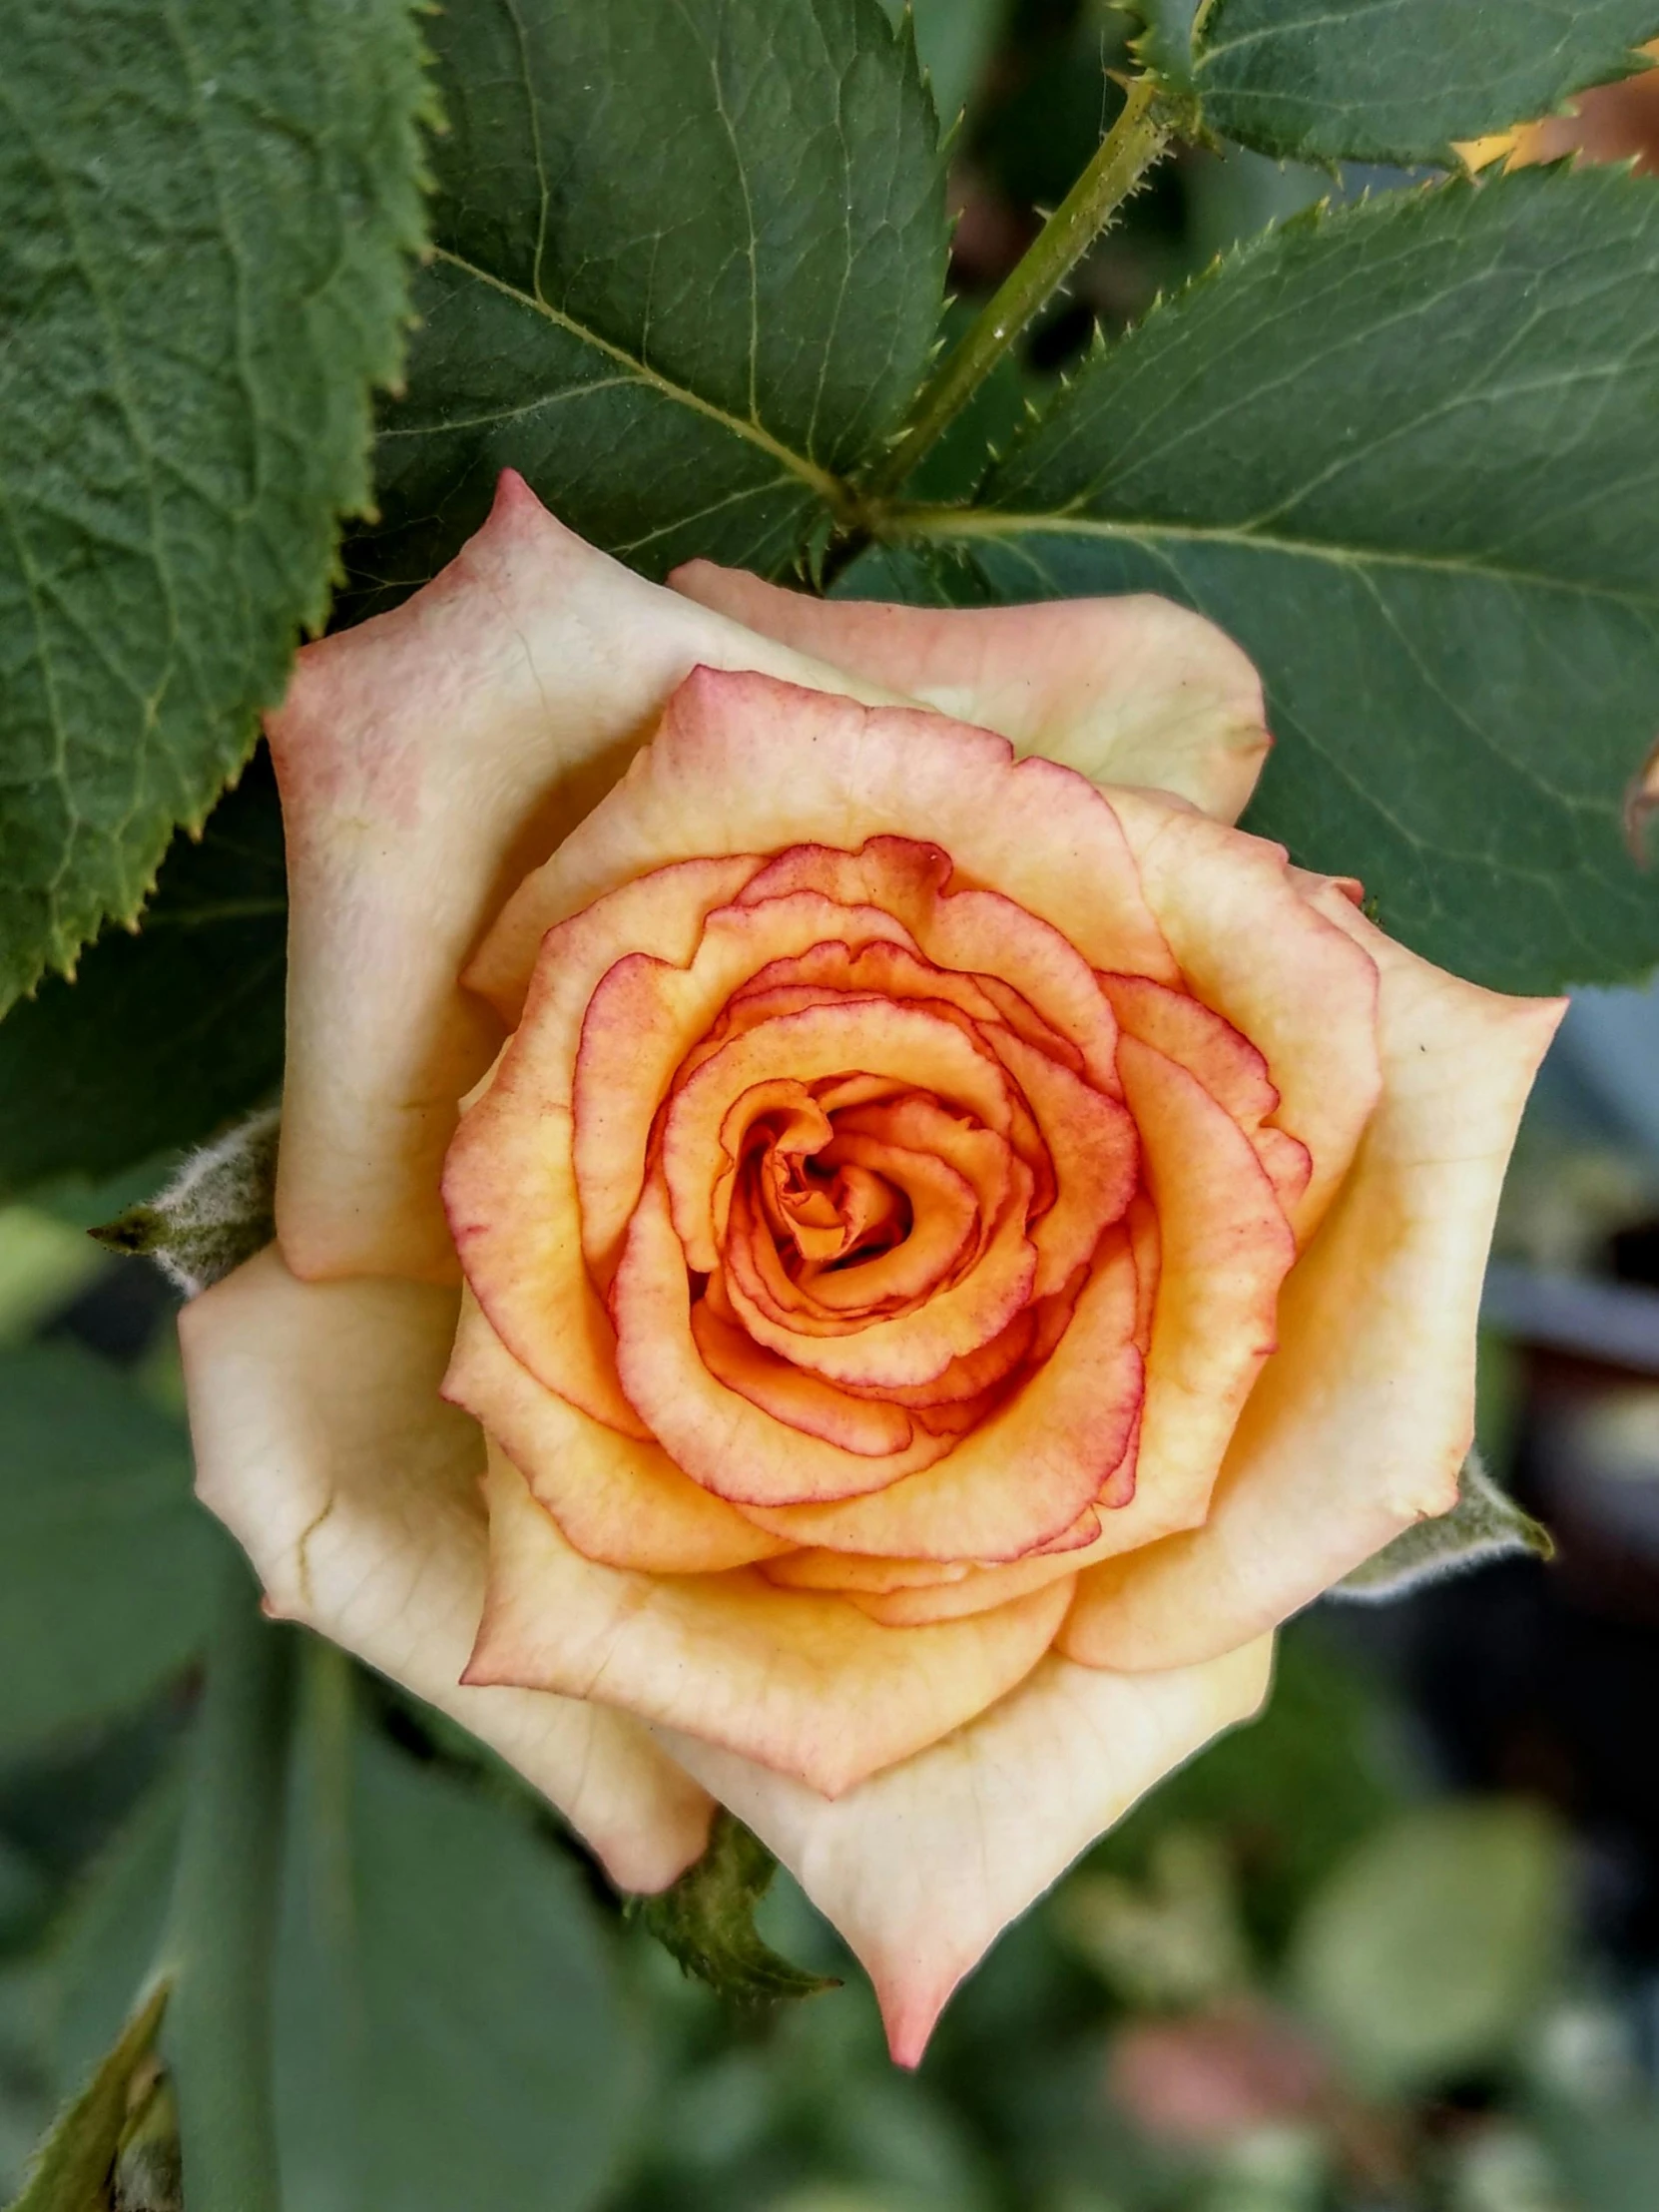 a close up of a flower on a plant, crown of mechanical peach roses, faded red and yelow, 'groovy', whites